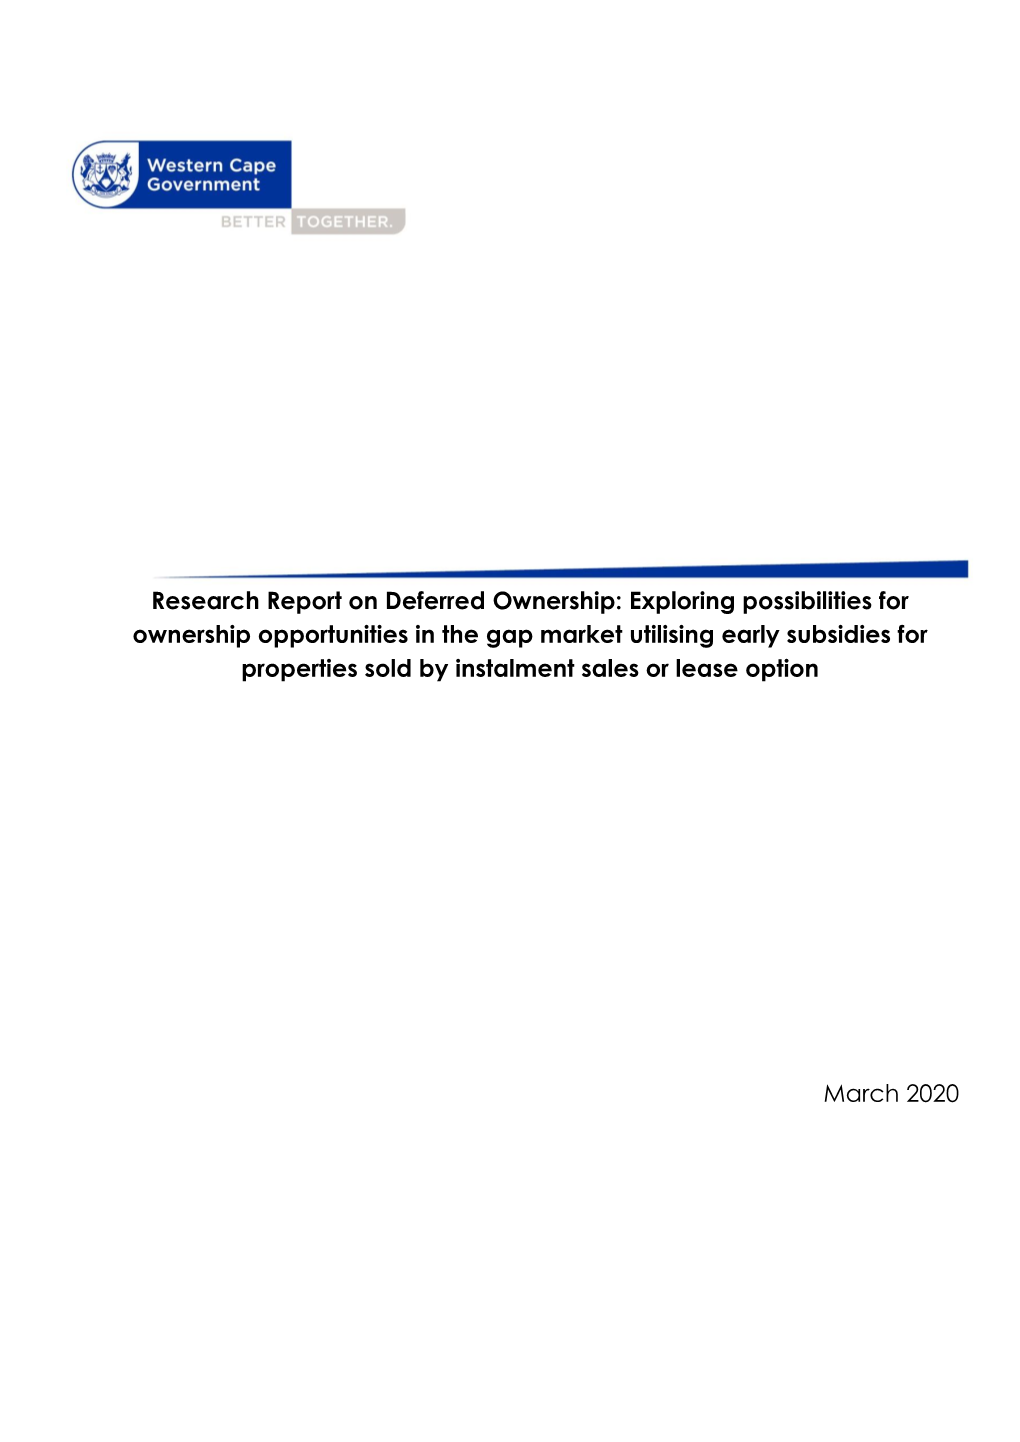 Research Report on Deferred Ownership and Early Subsidies